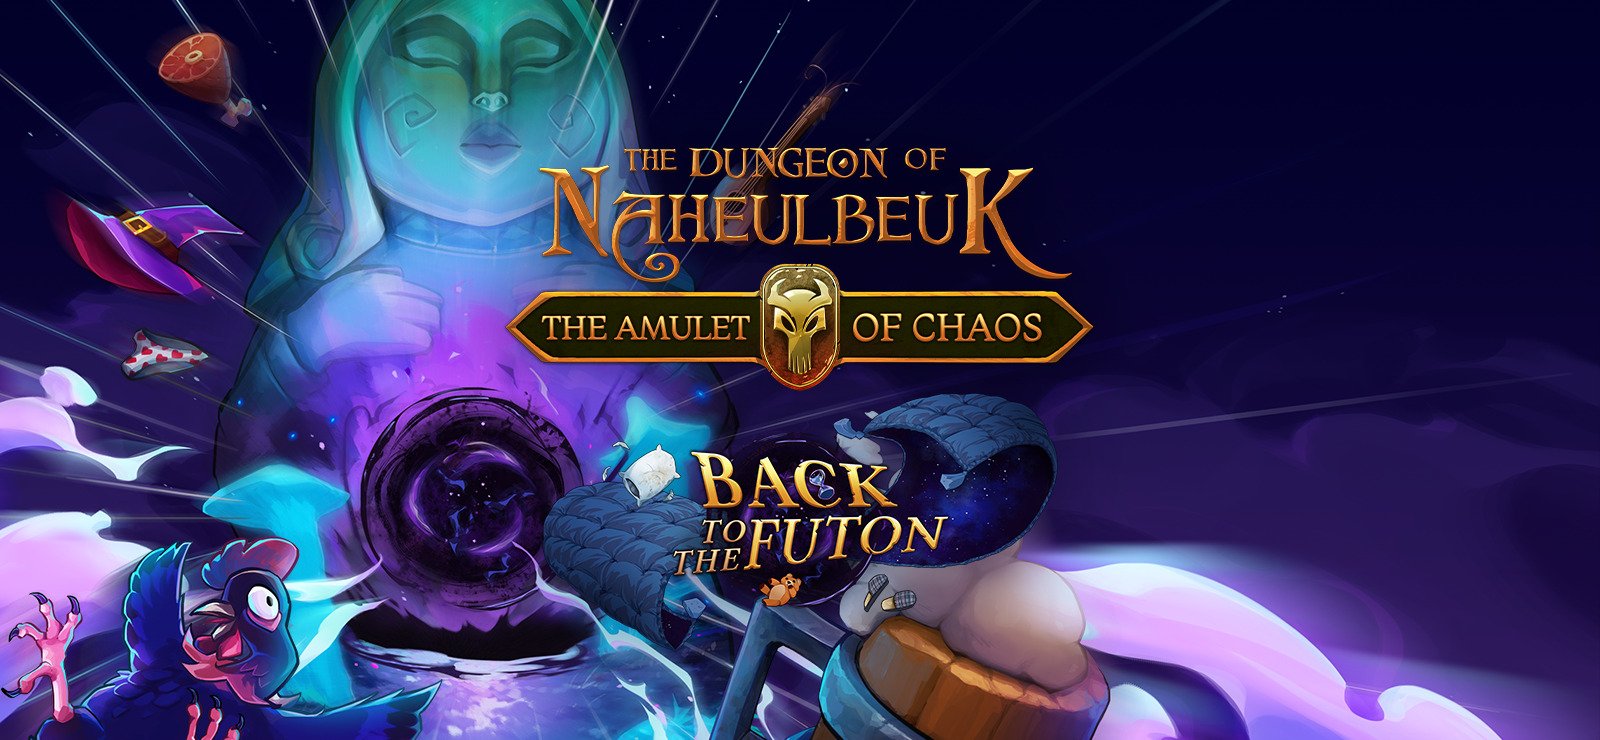 The Dungeon Of Naheulbeuk Back To The Futon 7